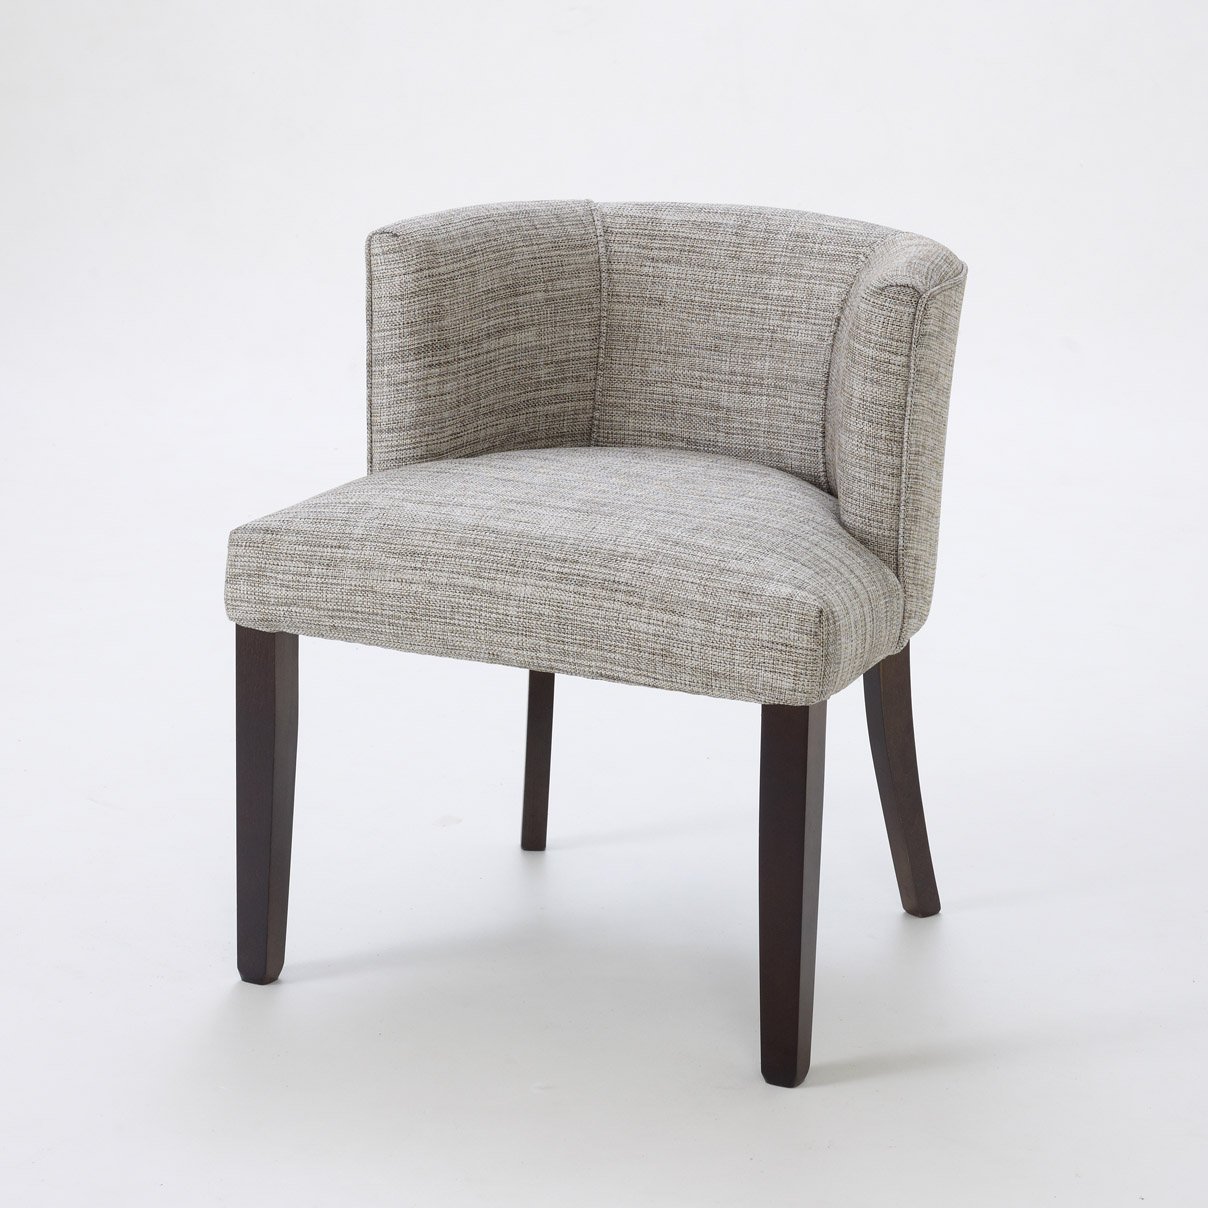 Low Profile Dining Chair Worldmarket Tufted | Chair Design